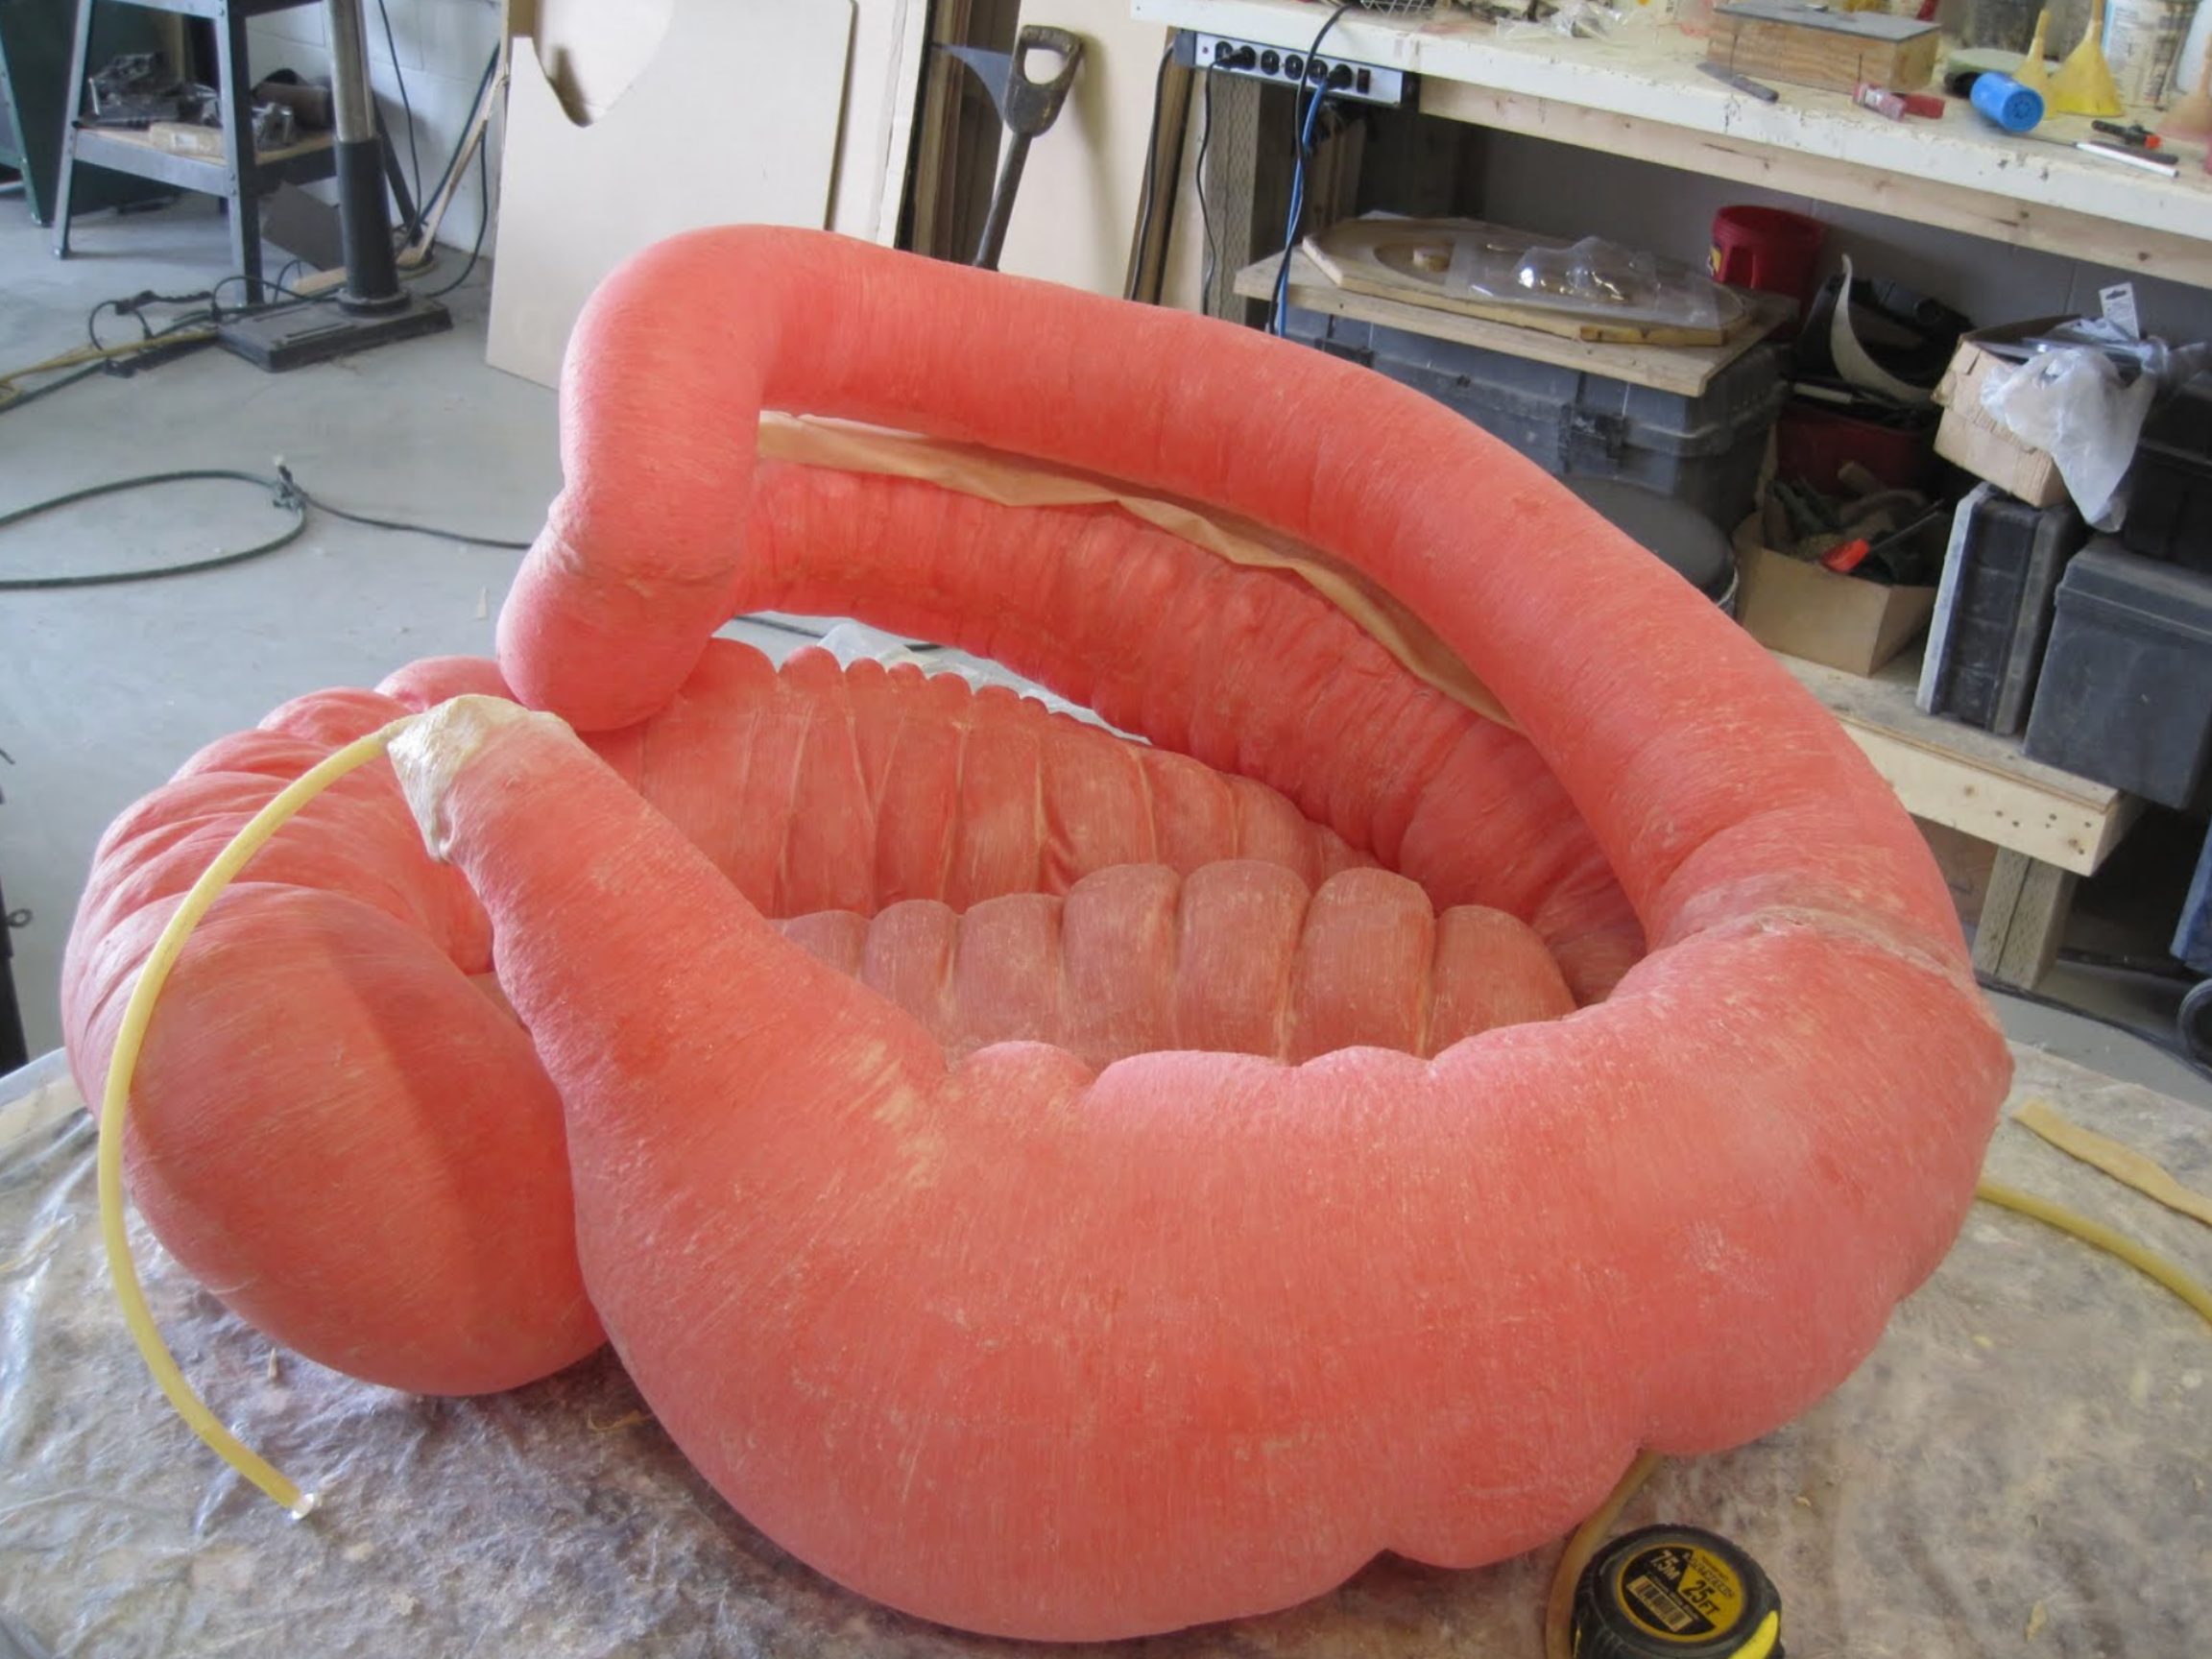 Another view of the nearly complete equine colon.